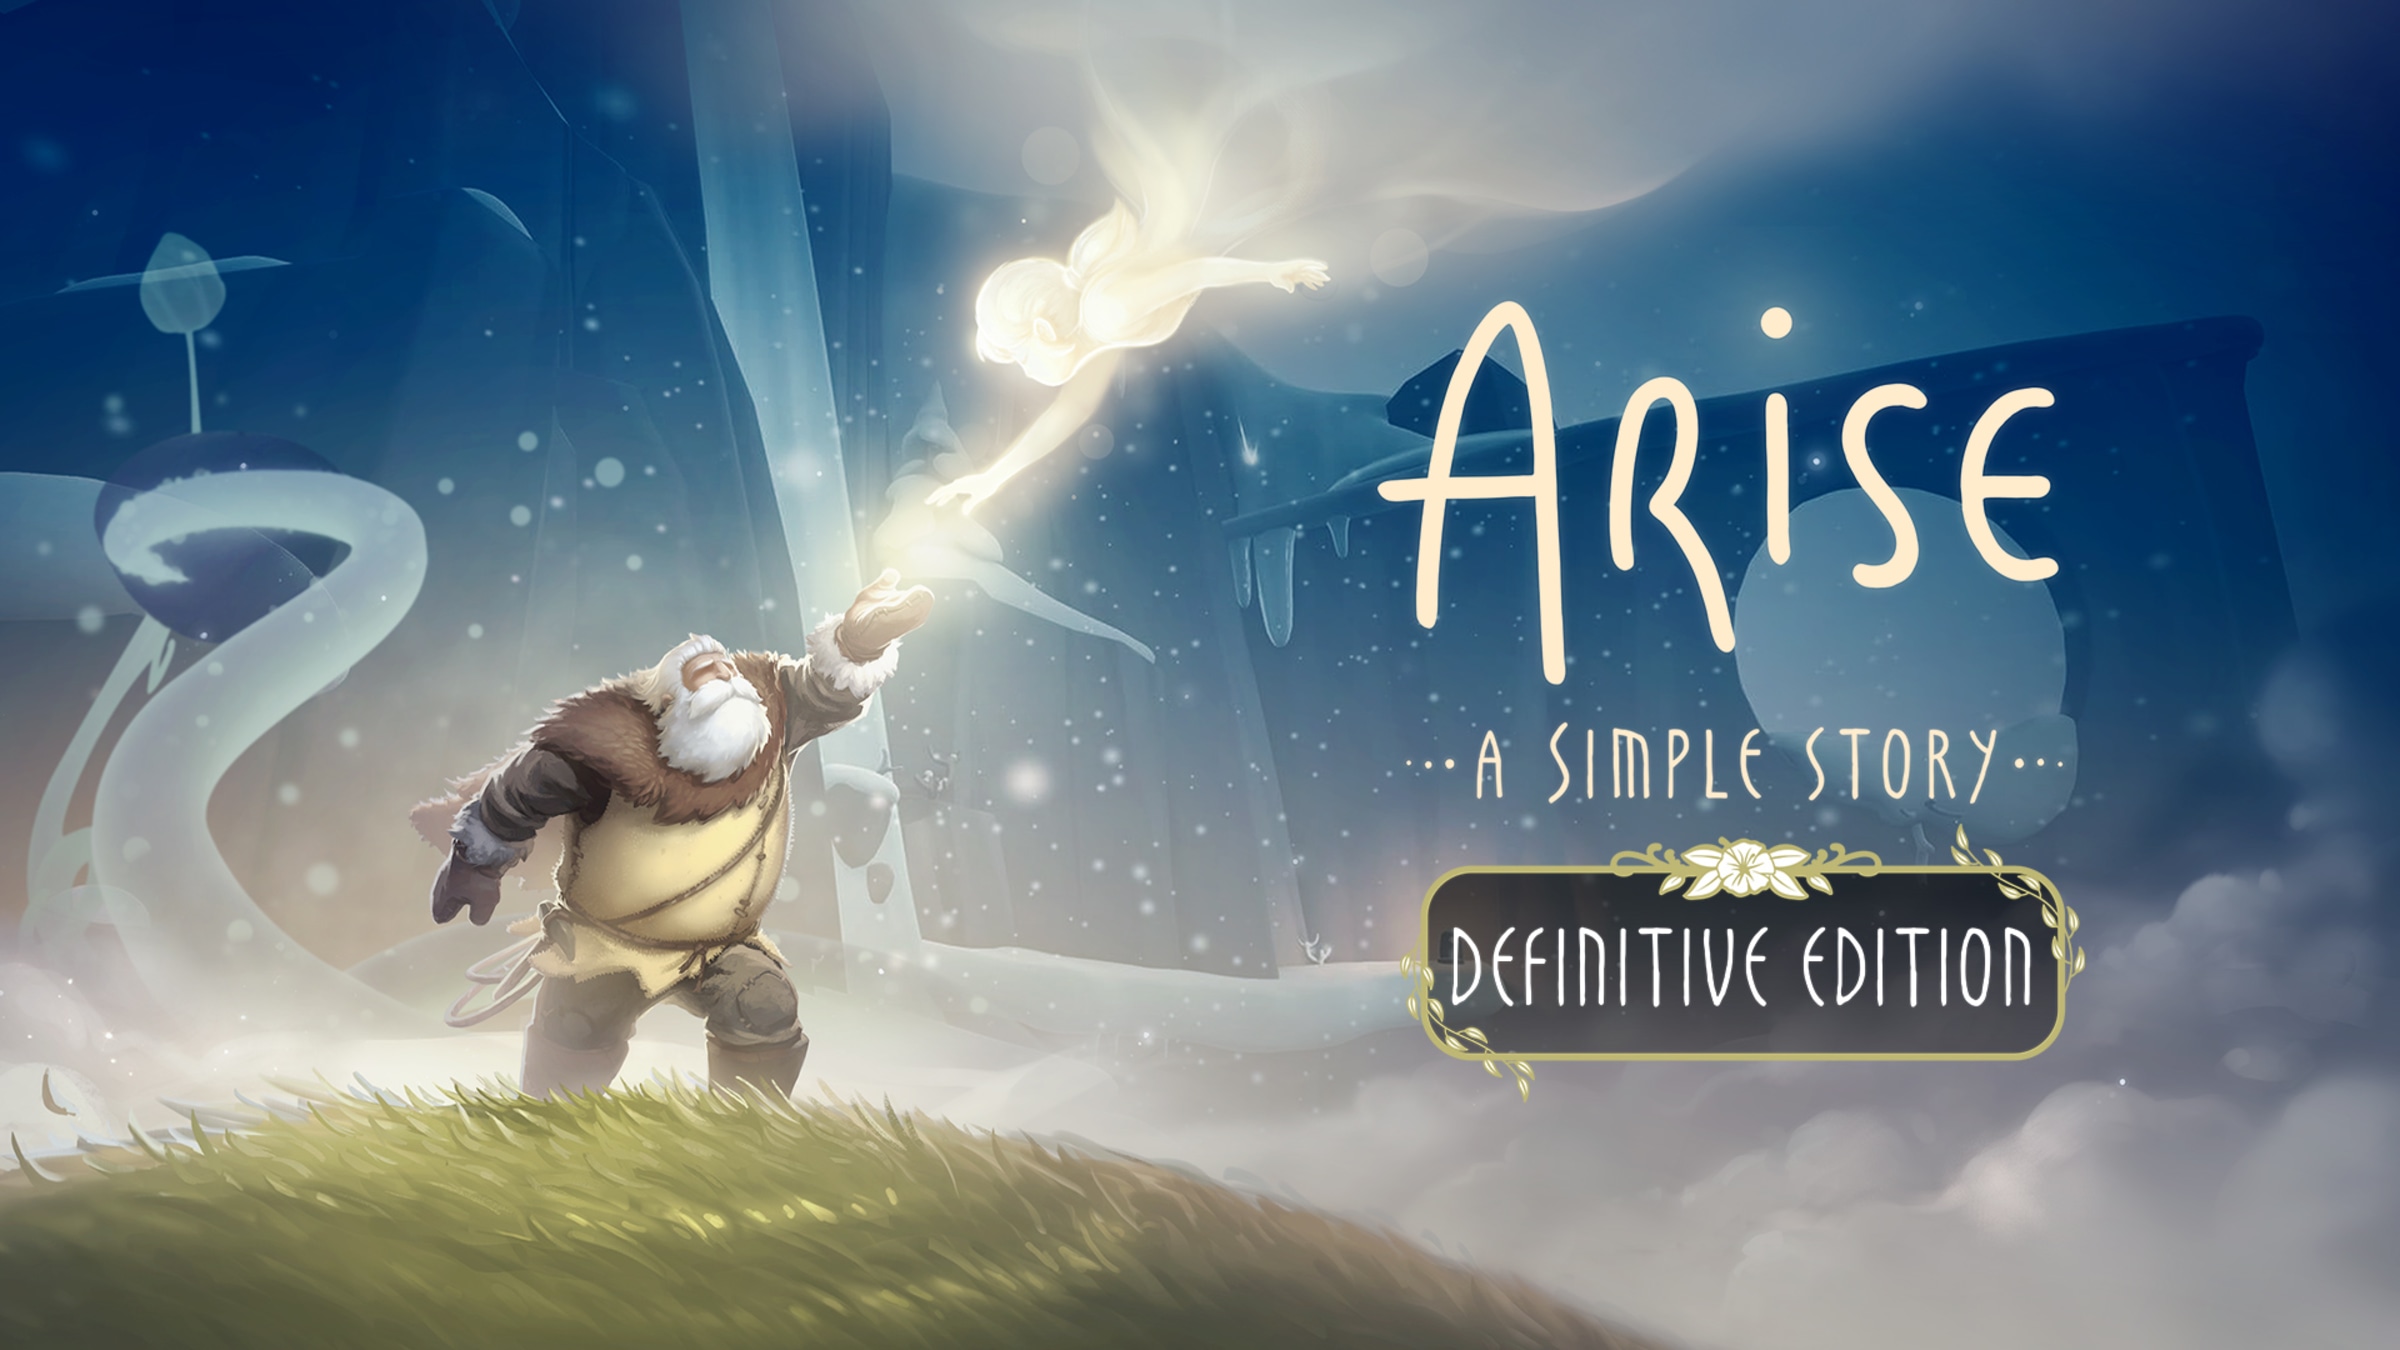 Arise: A Simple Story - Definitive Edition (Nintendo Switch Digital Download) $2.99